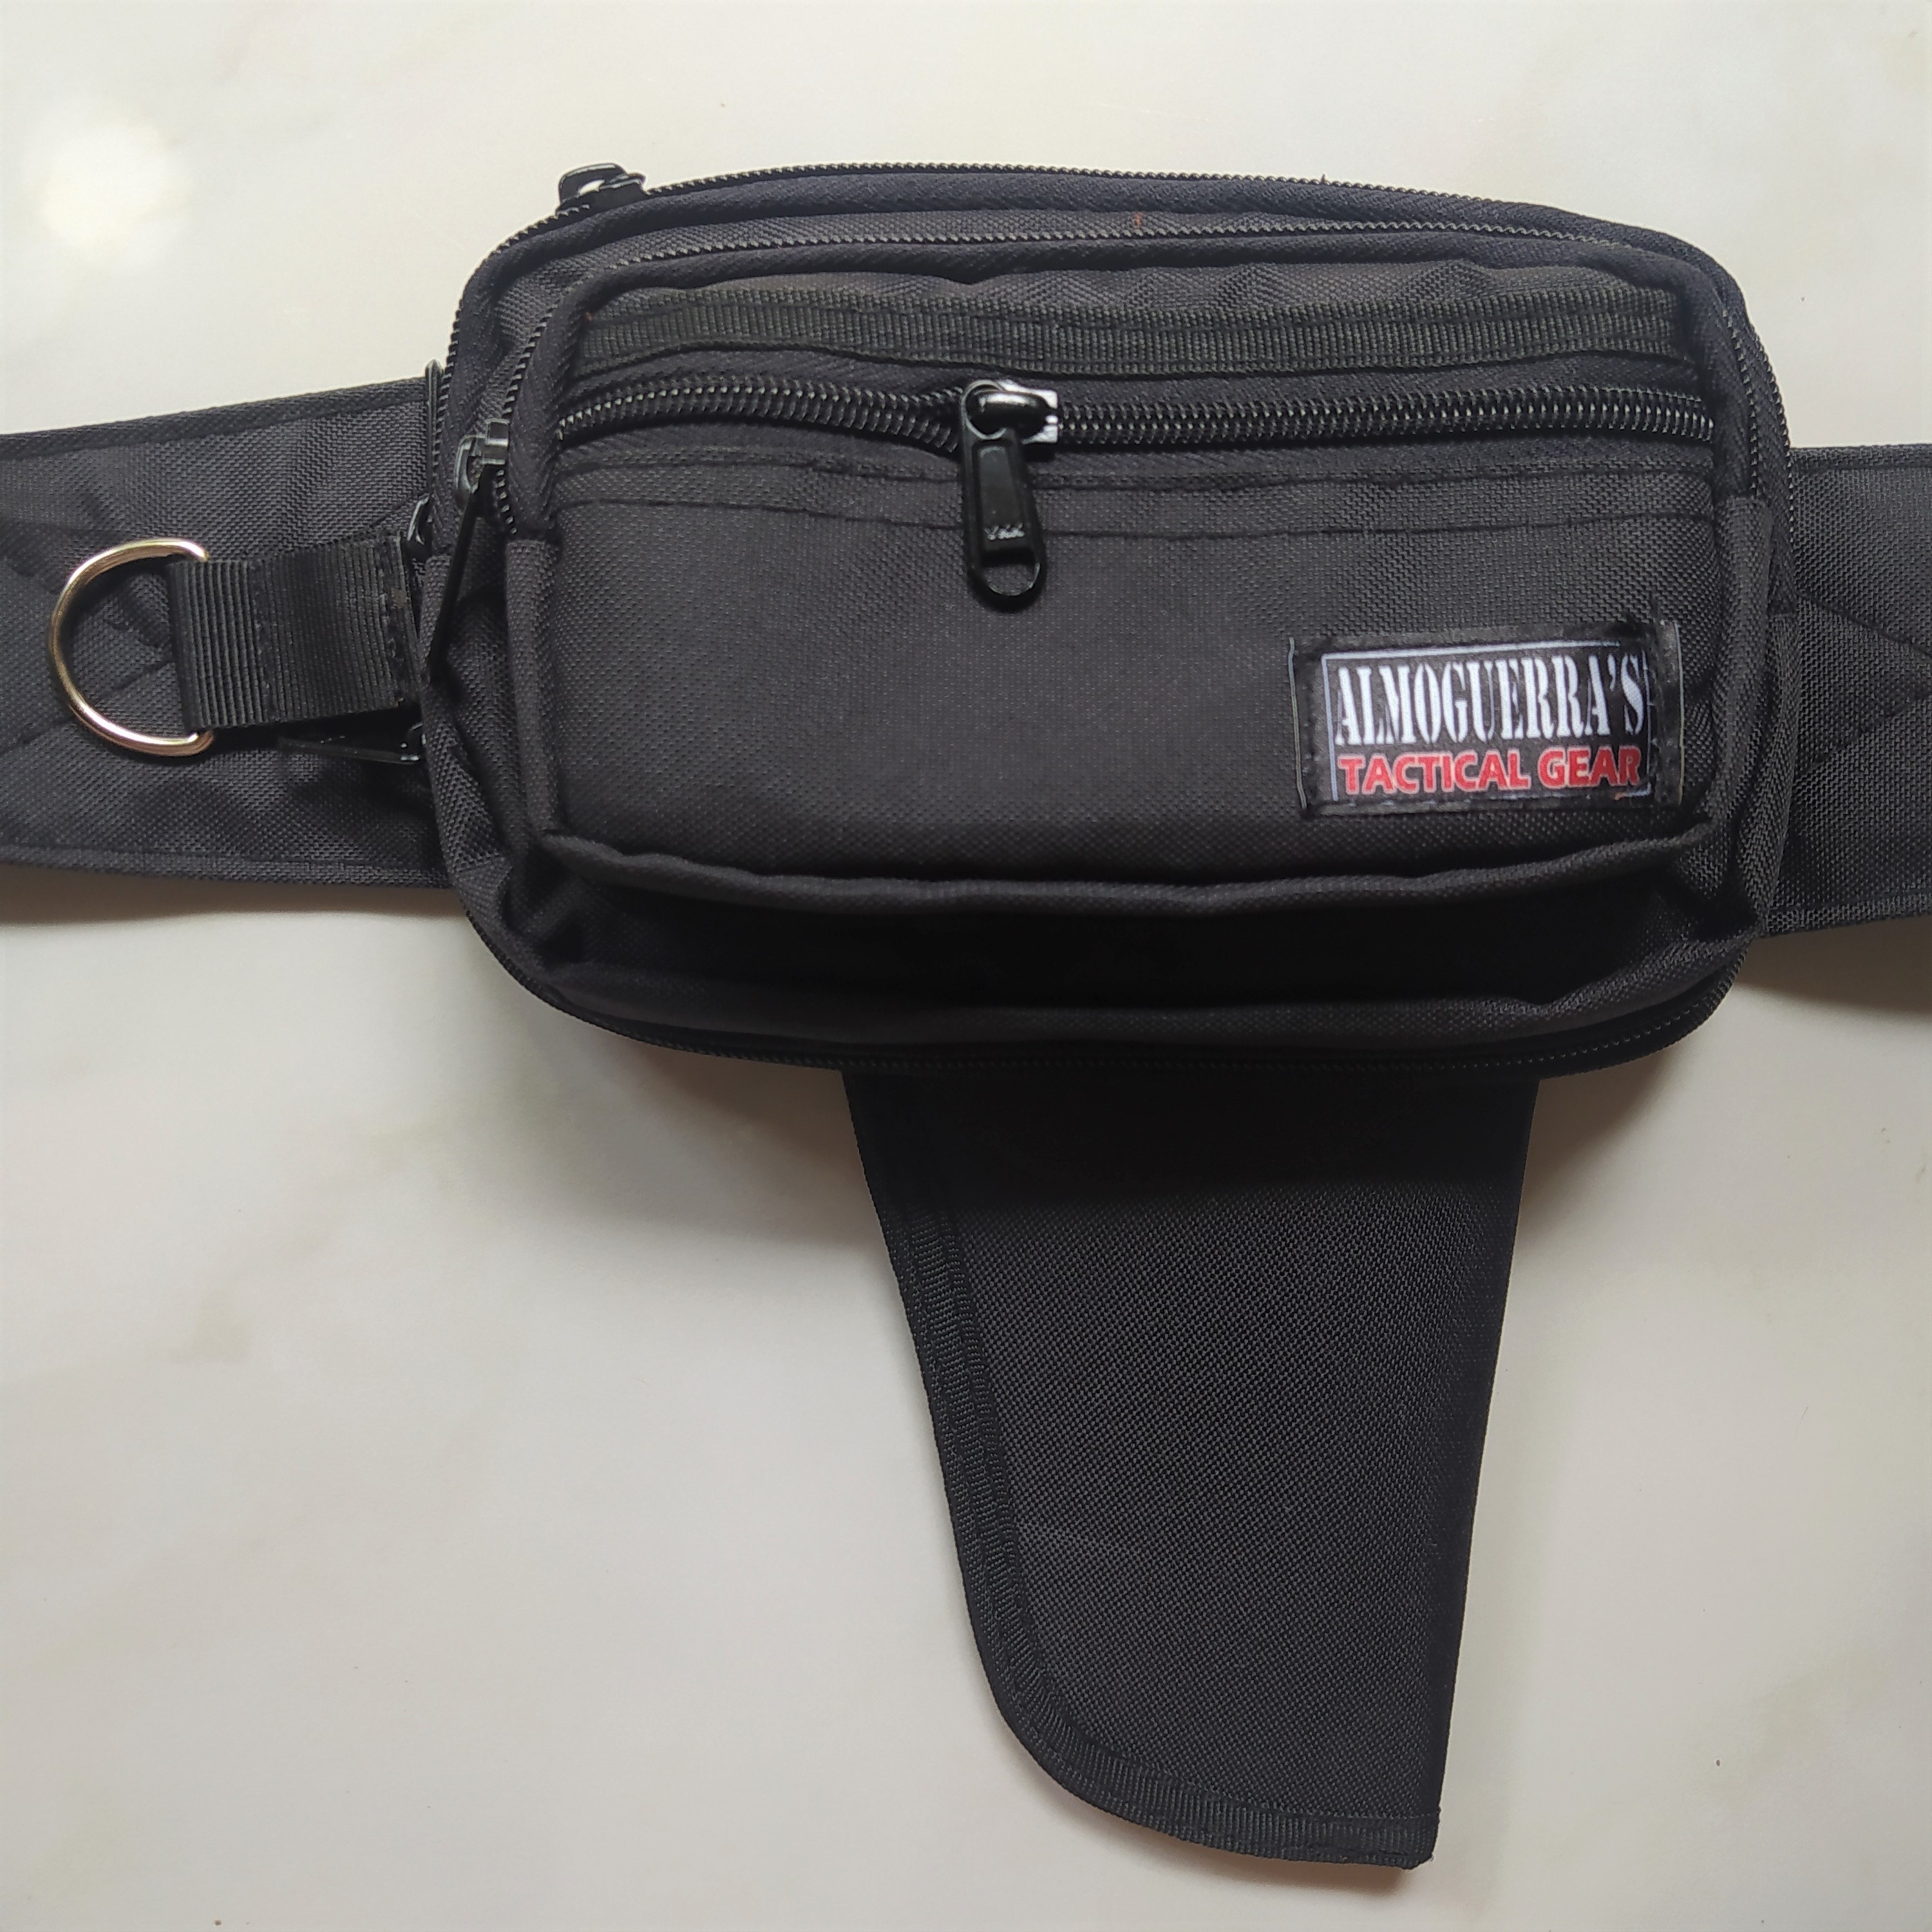 ALMOGUERRA BELT BAG WITH HOLSTER QUICK DRAW/QUICK RELEASE CONCEALED